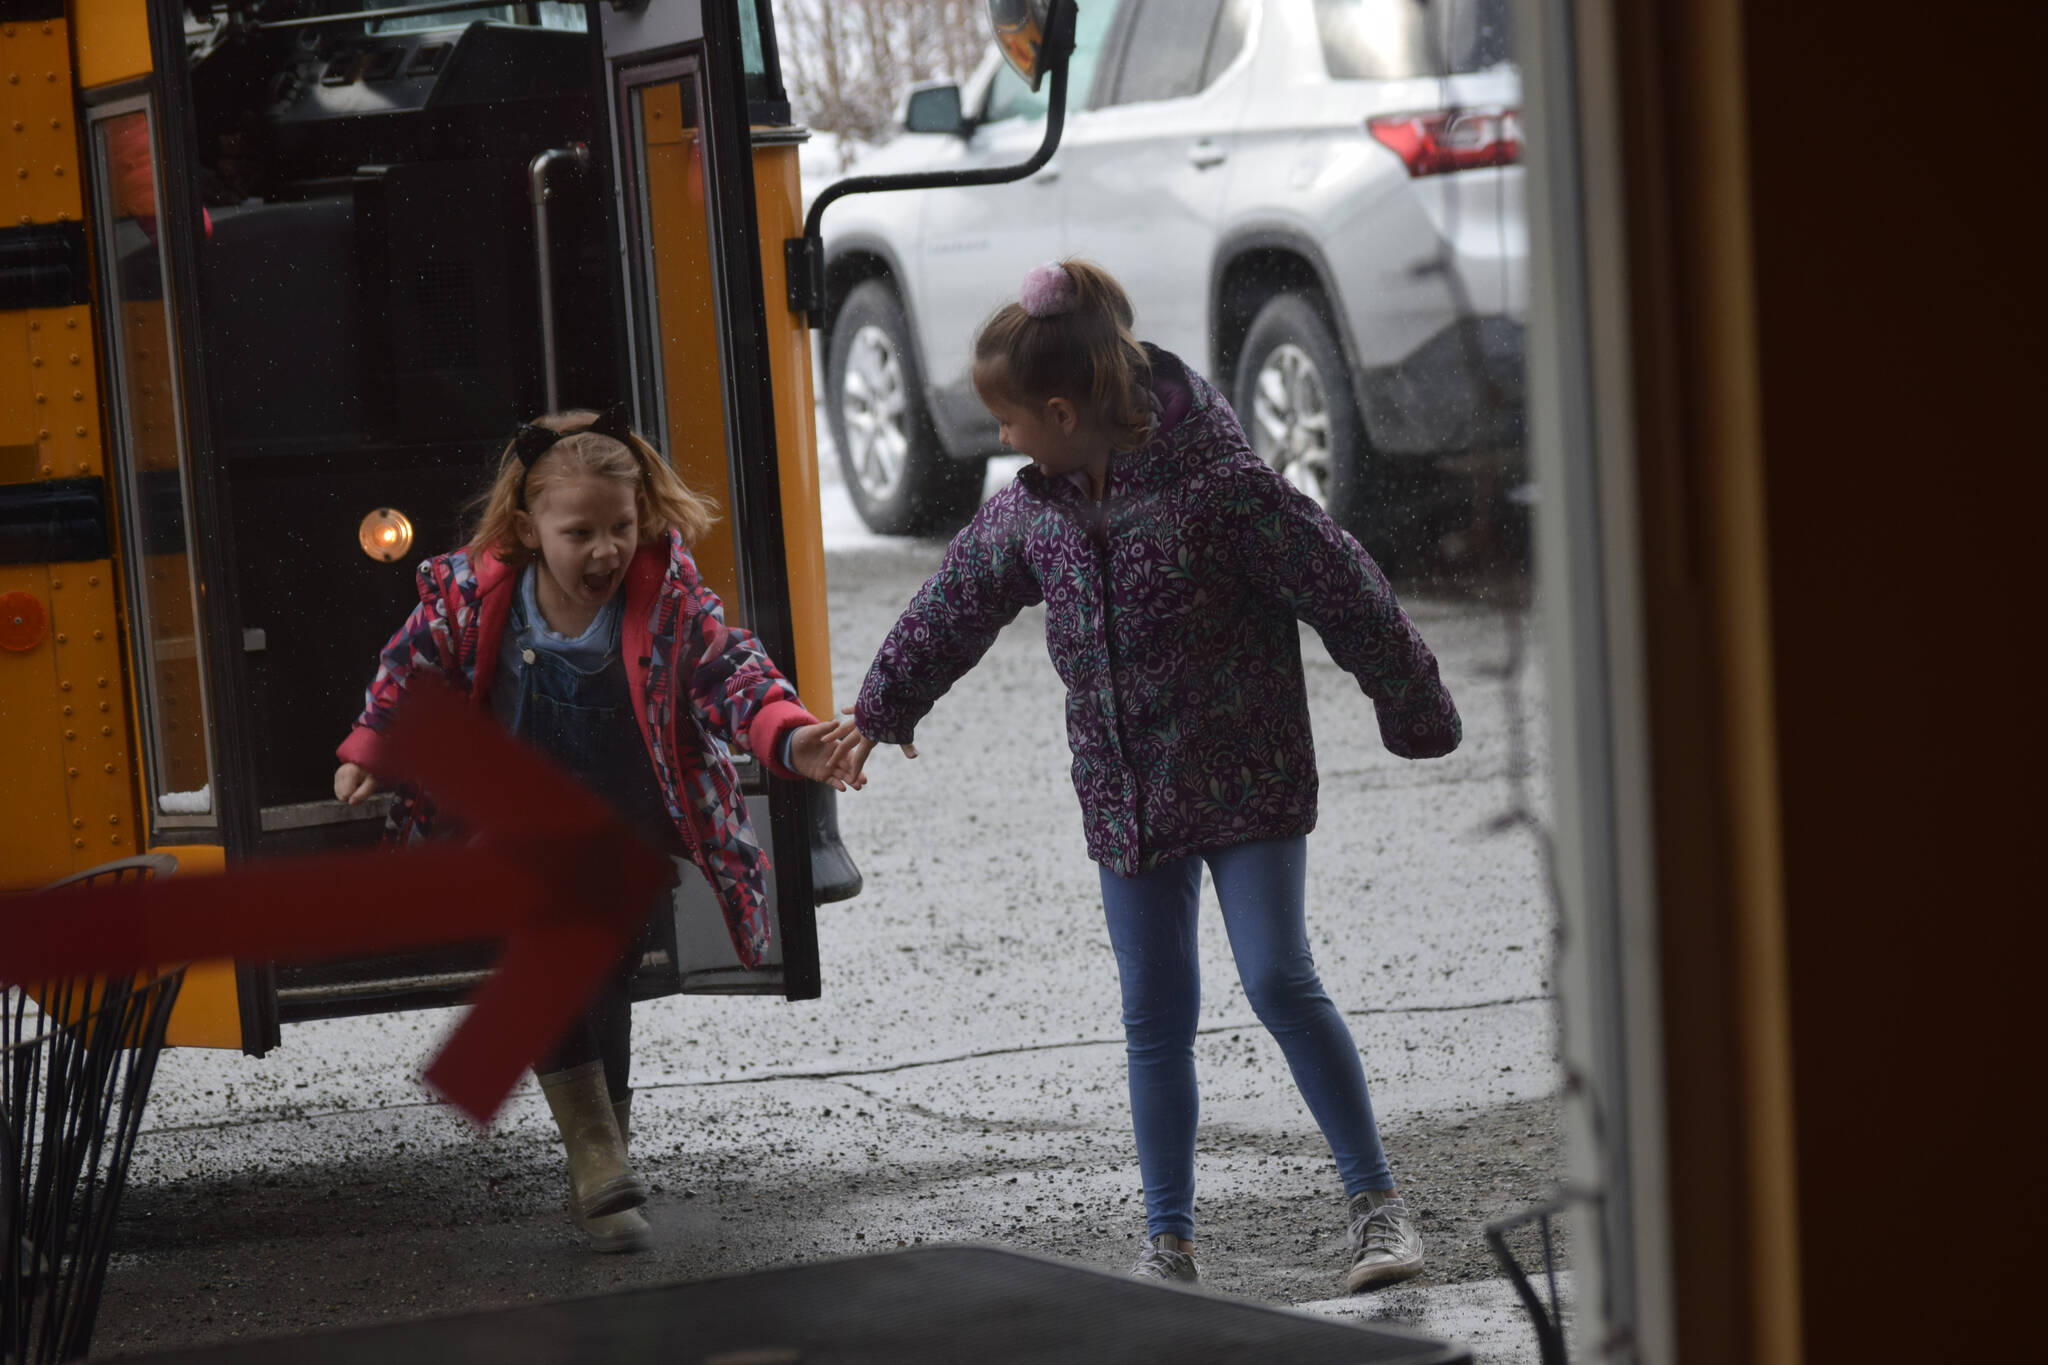 The Soldotna Elementary School kindergarten class runs into Kaladi Brothers Coffee on South Kobuk Street in Soldotna, Alaska, on Friday, April 8, 2022, to look at their art show. (Camille Botello/Peninsula Clarion)